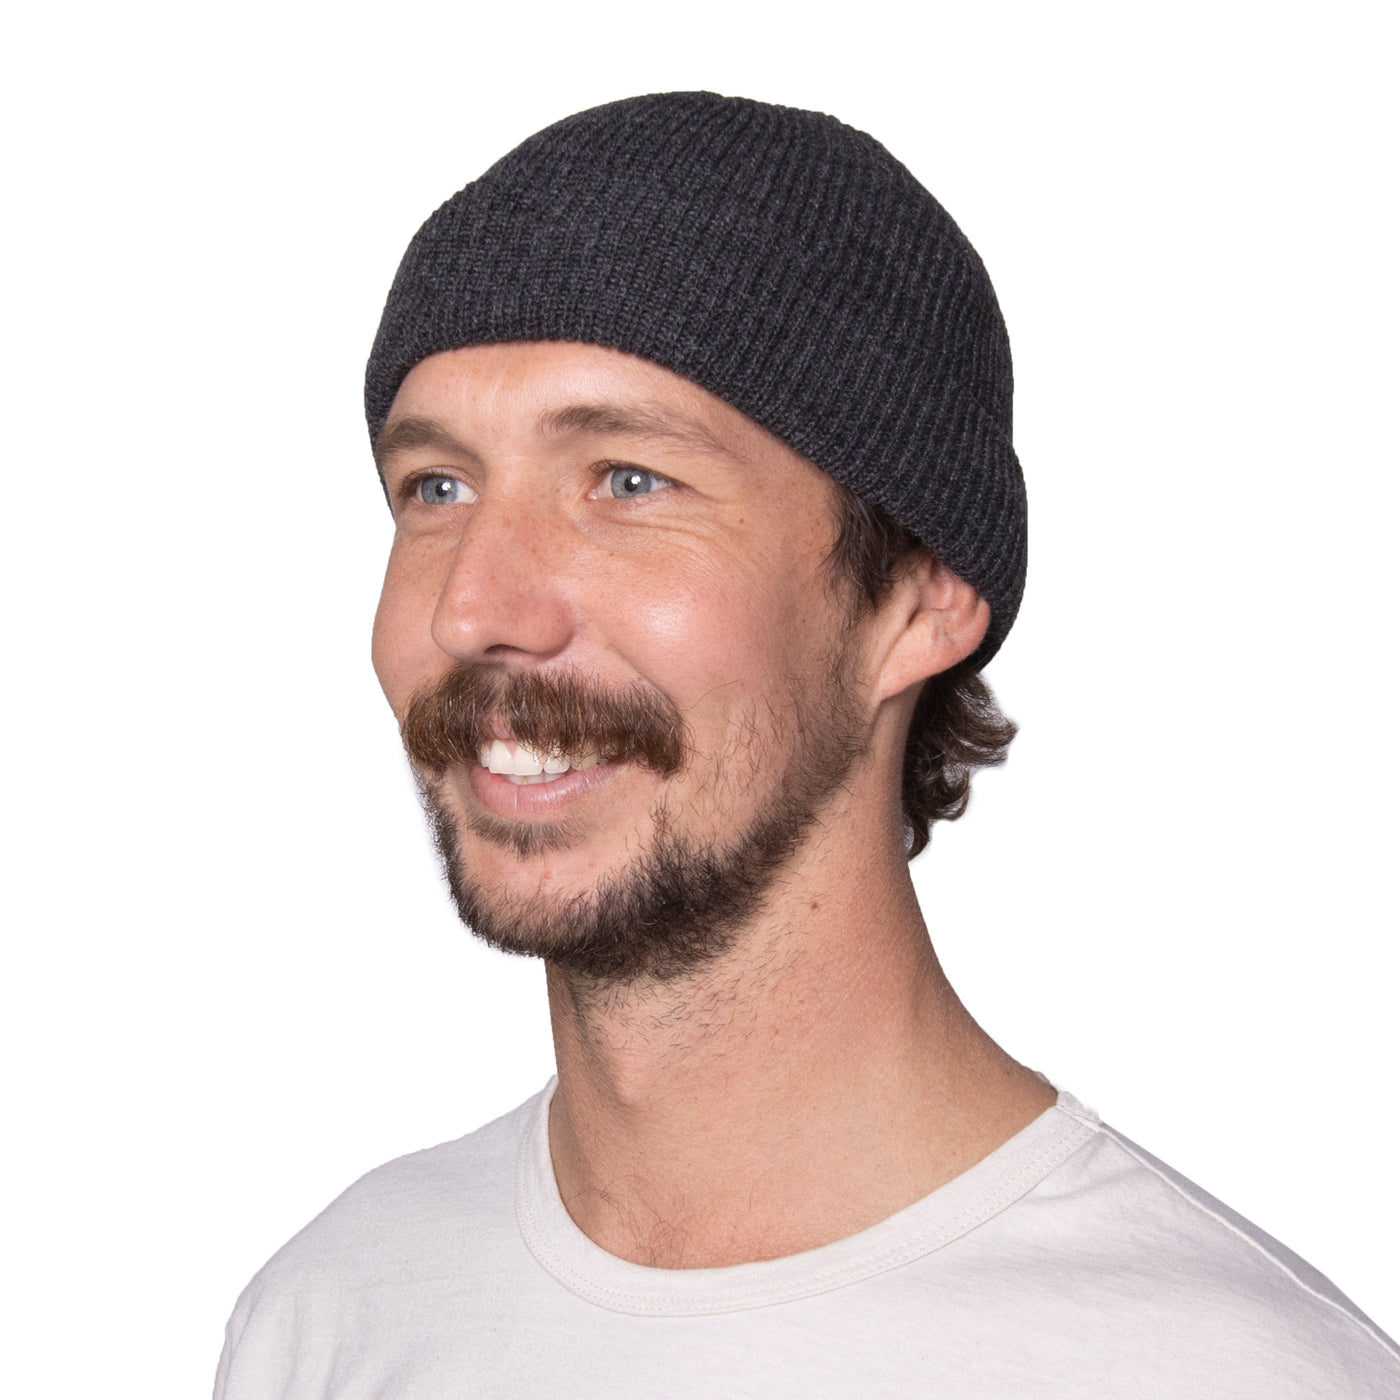 Image of how the beanie fit on ones head